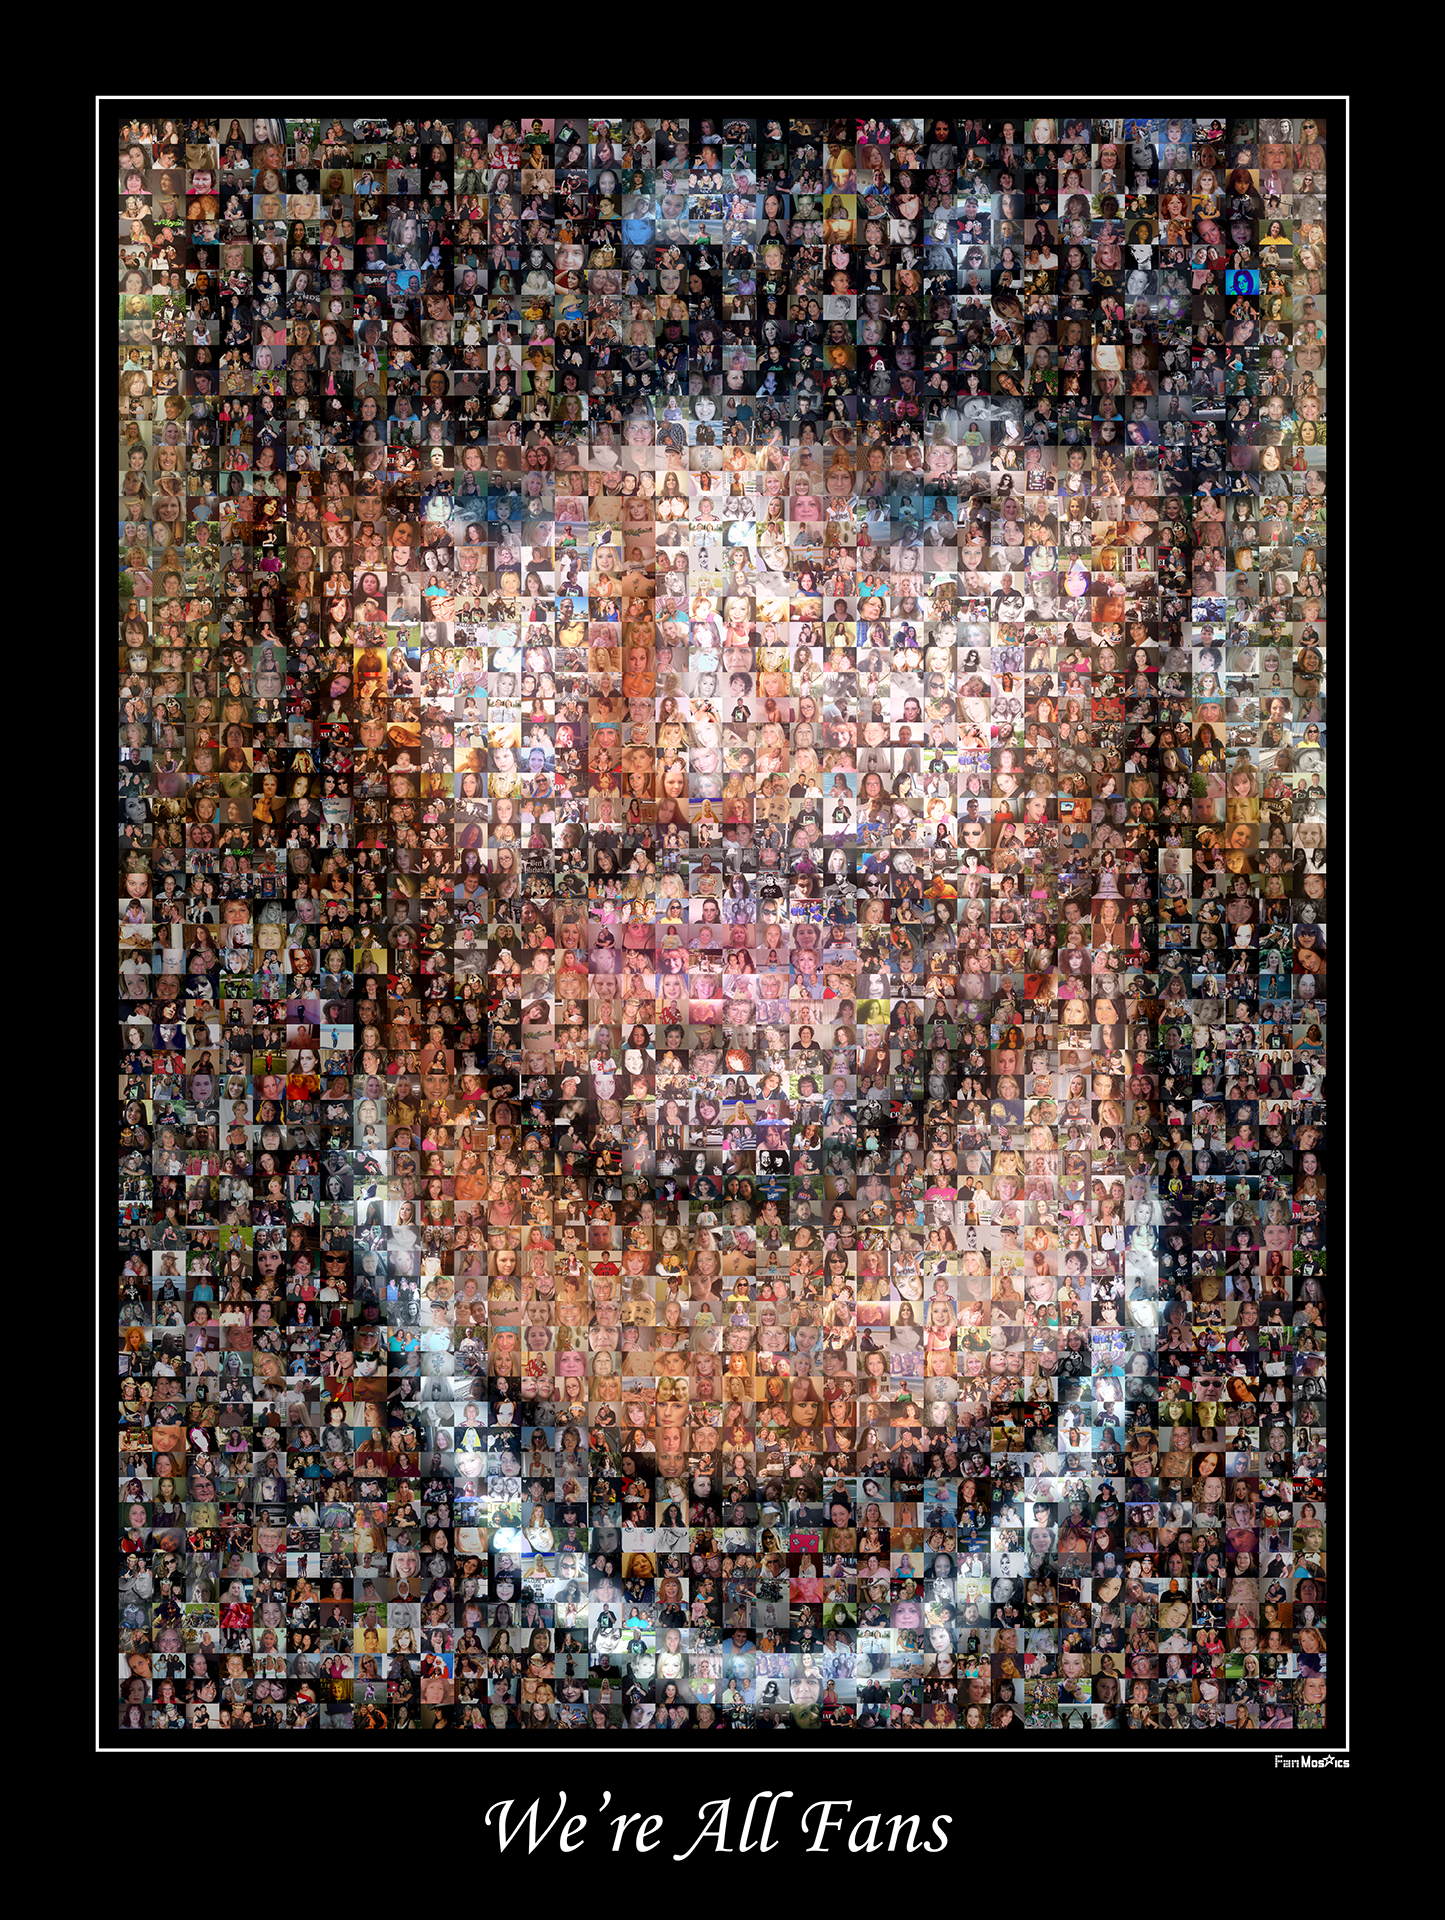 photo mosaic created using over 1,800 fan submitted photos